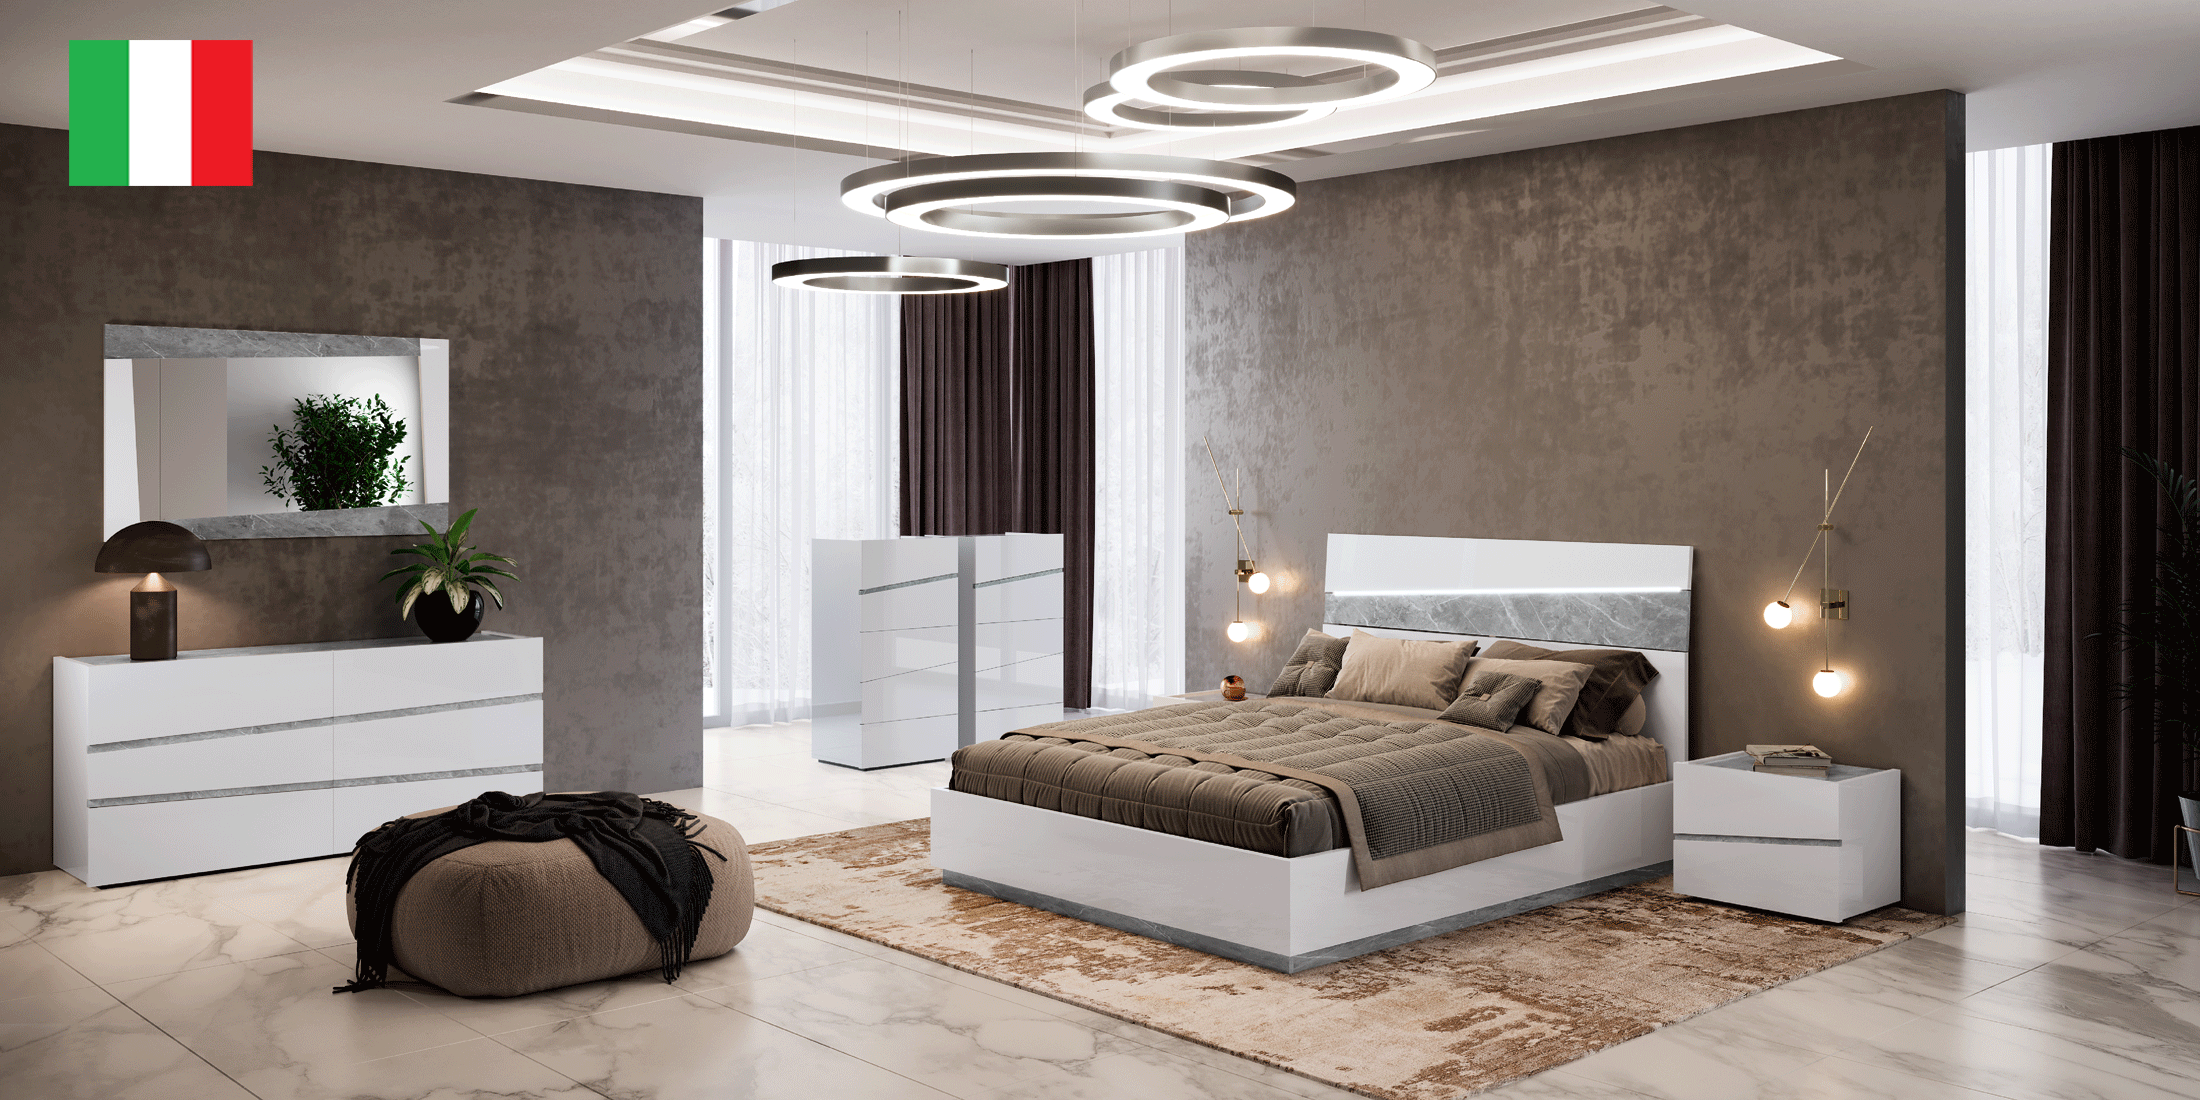 Bedroom Furniture Beds with storage Alba Bedroom w/ Light by Camelgroup – Italy